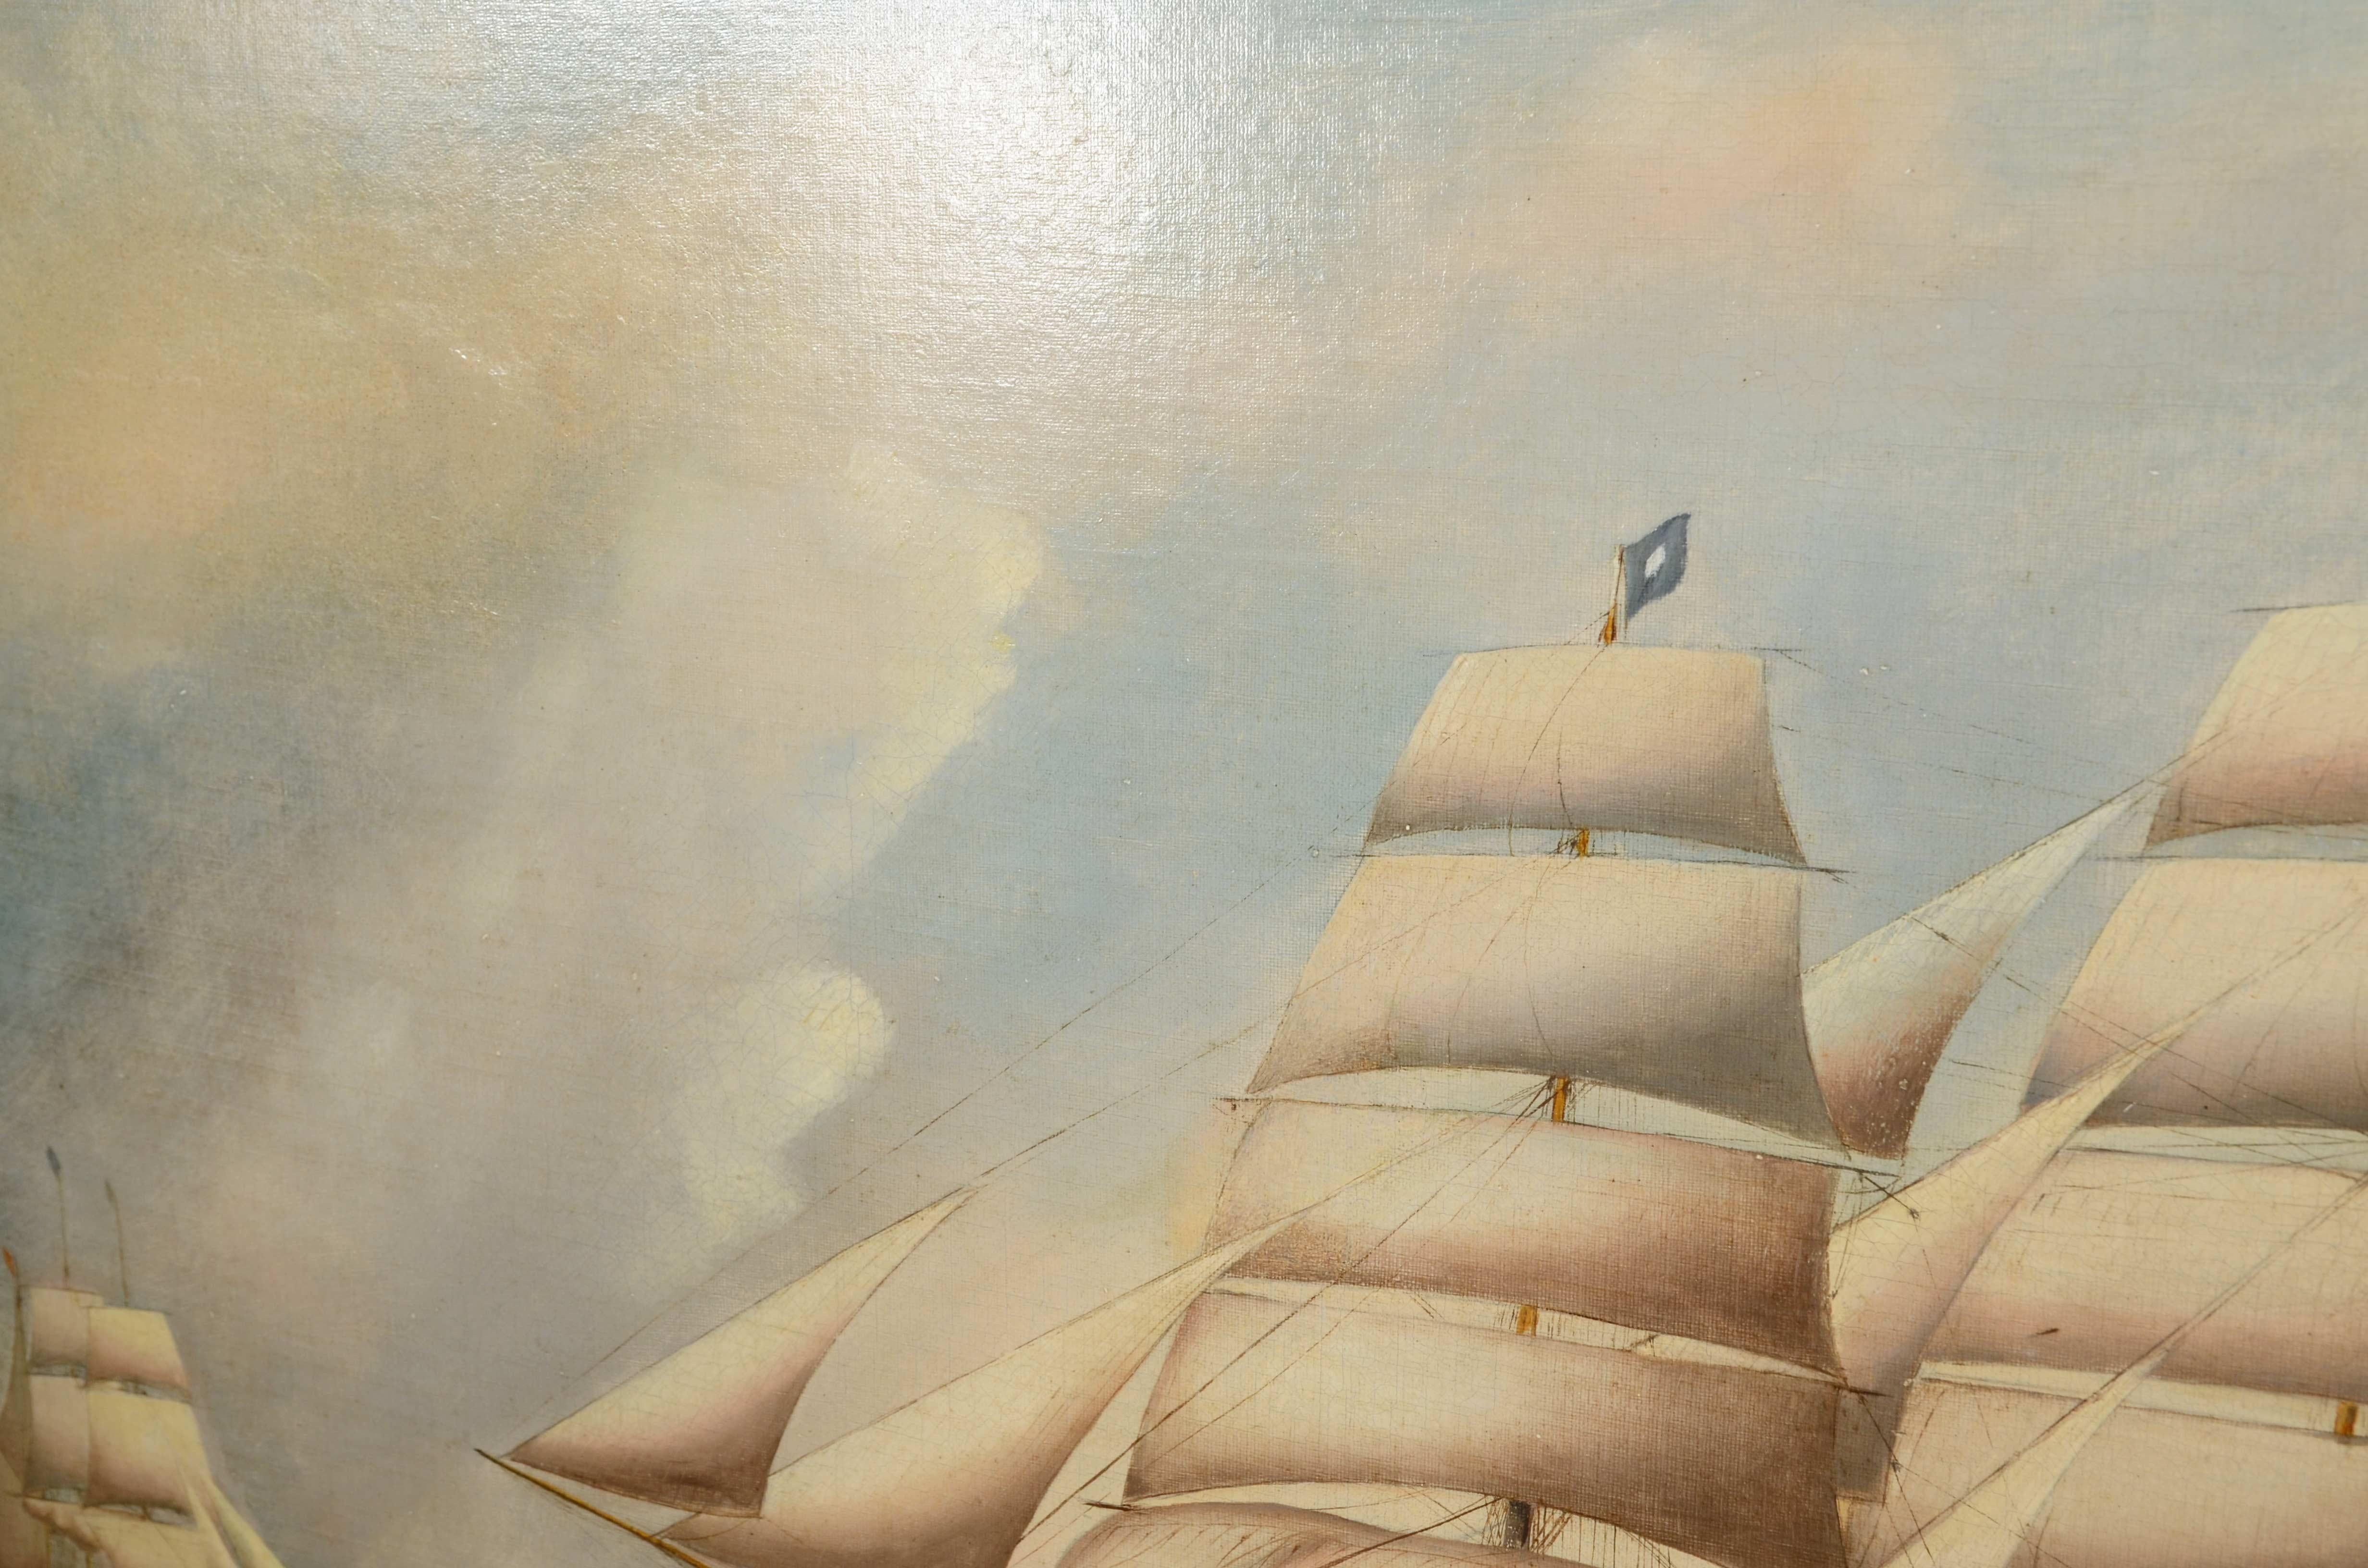 Oil on canvas, antique portrait of a ship dating from the first half of the 19th century. For Sale 7